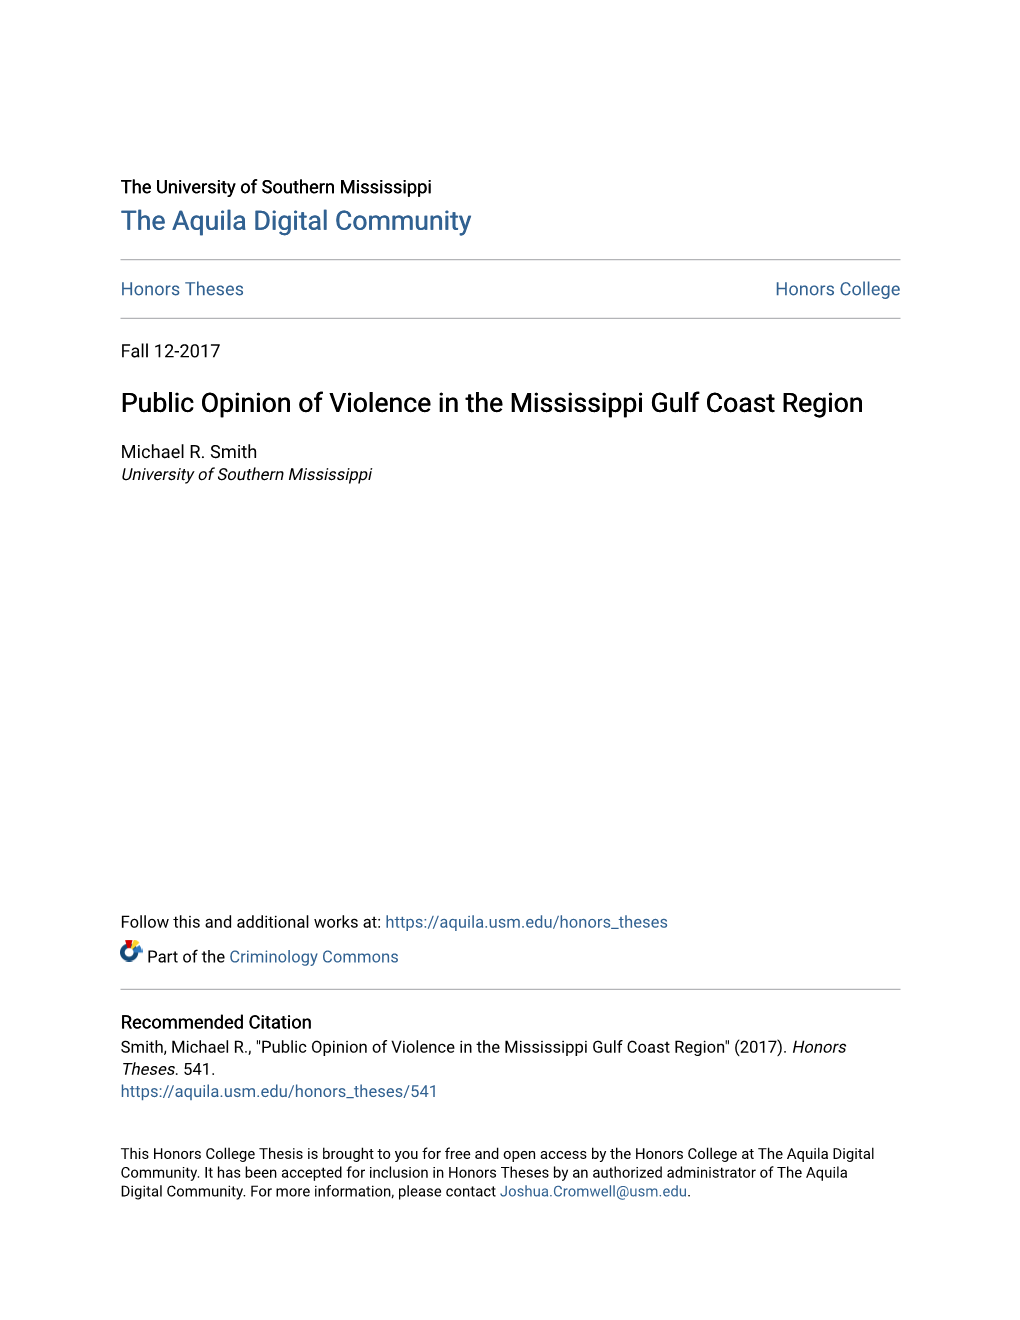 Public Opinion of Violence in the Mississippi Gulf Coast Region